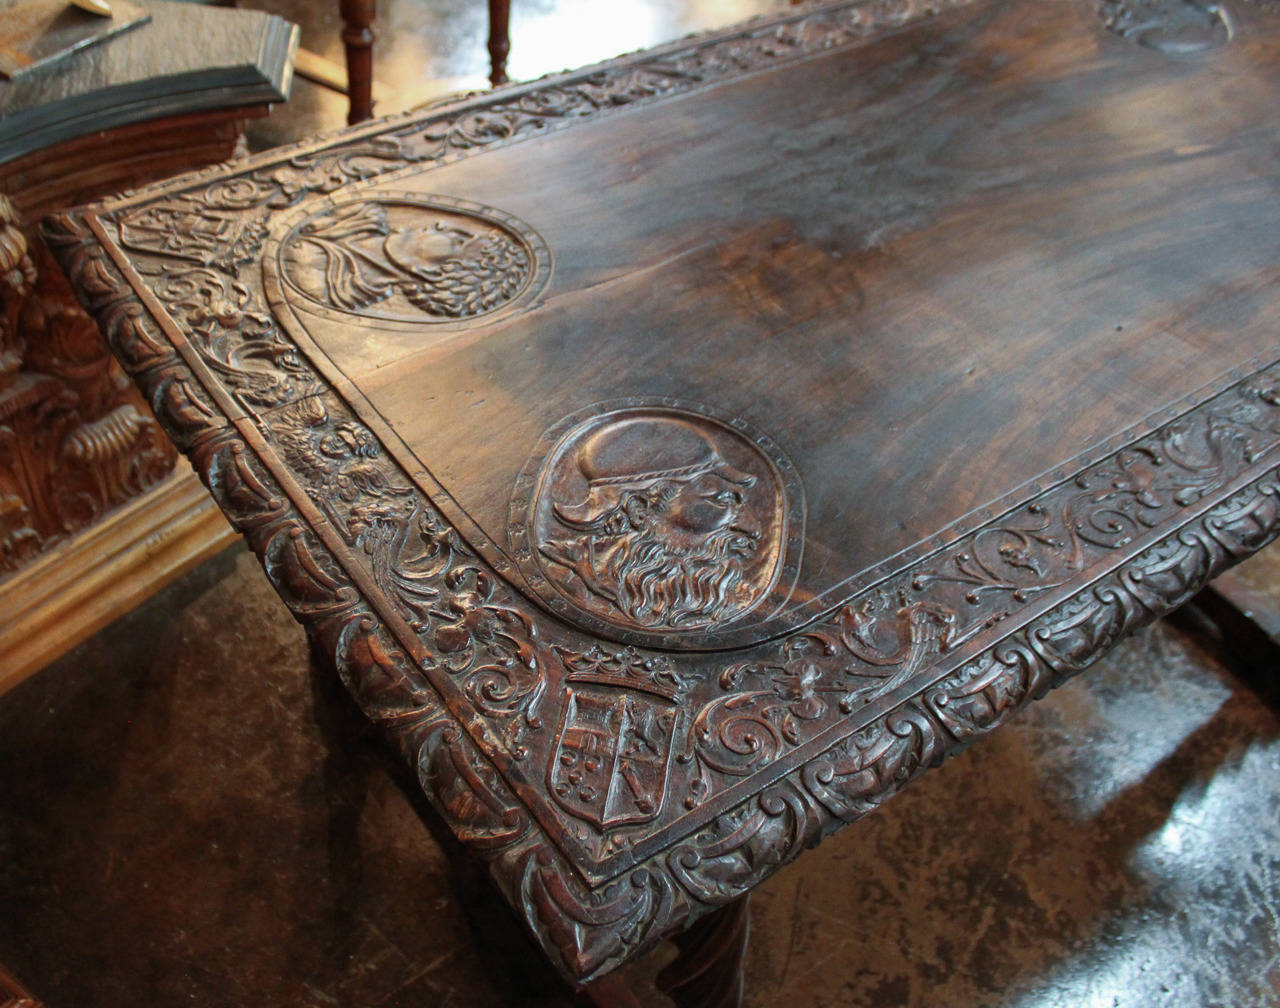 Superbly hand carved Italian walnut trestle table resting on twisting legs. Having wonderfully carved faces in tabletop, crest and shield in each corner, adorned in foliate and winged putti motif, and the time worn patina offers rich character and